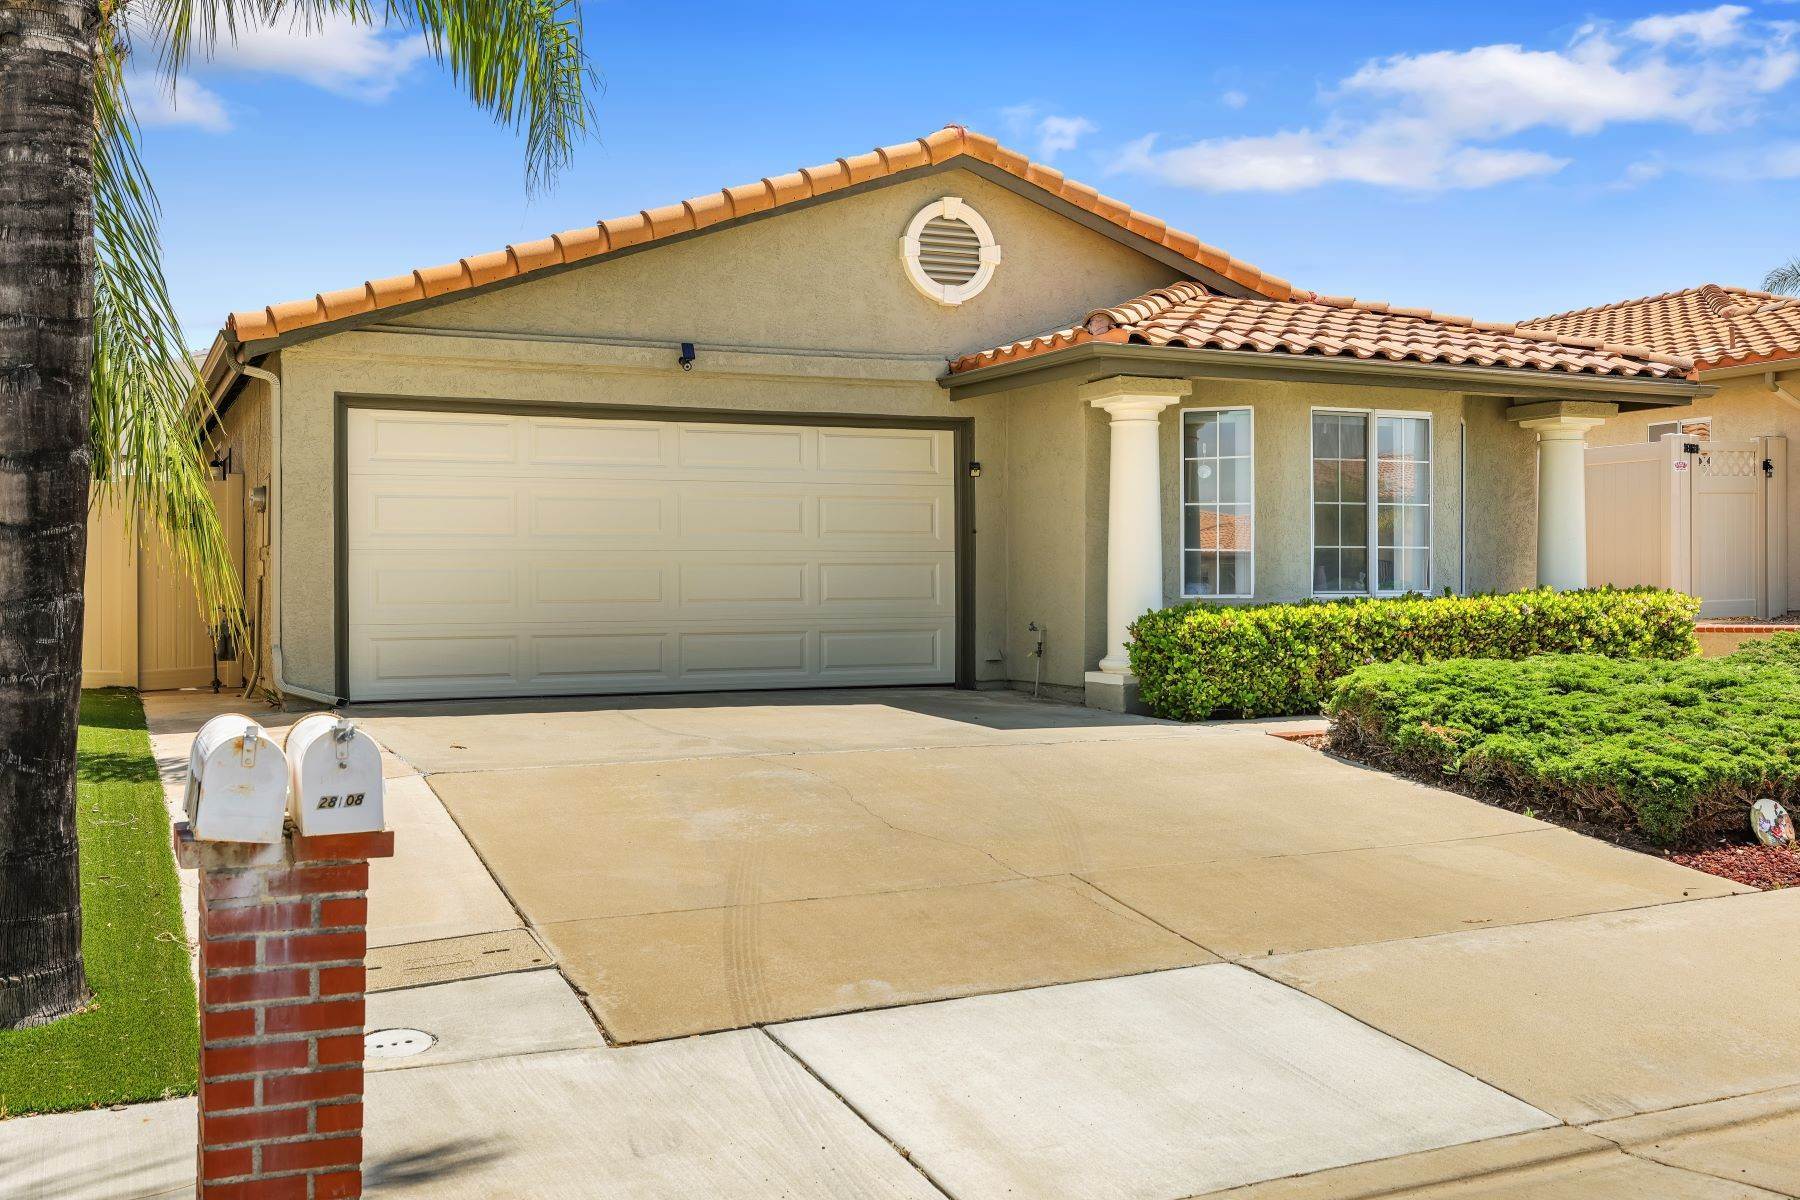 Single Family Homes for Sale at 55+ resort style living in Casablanca 28108 Calle Casera Menifee, California 92585 United States